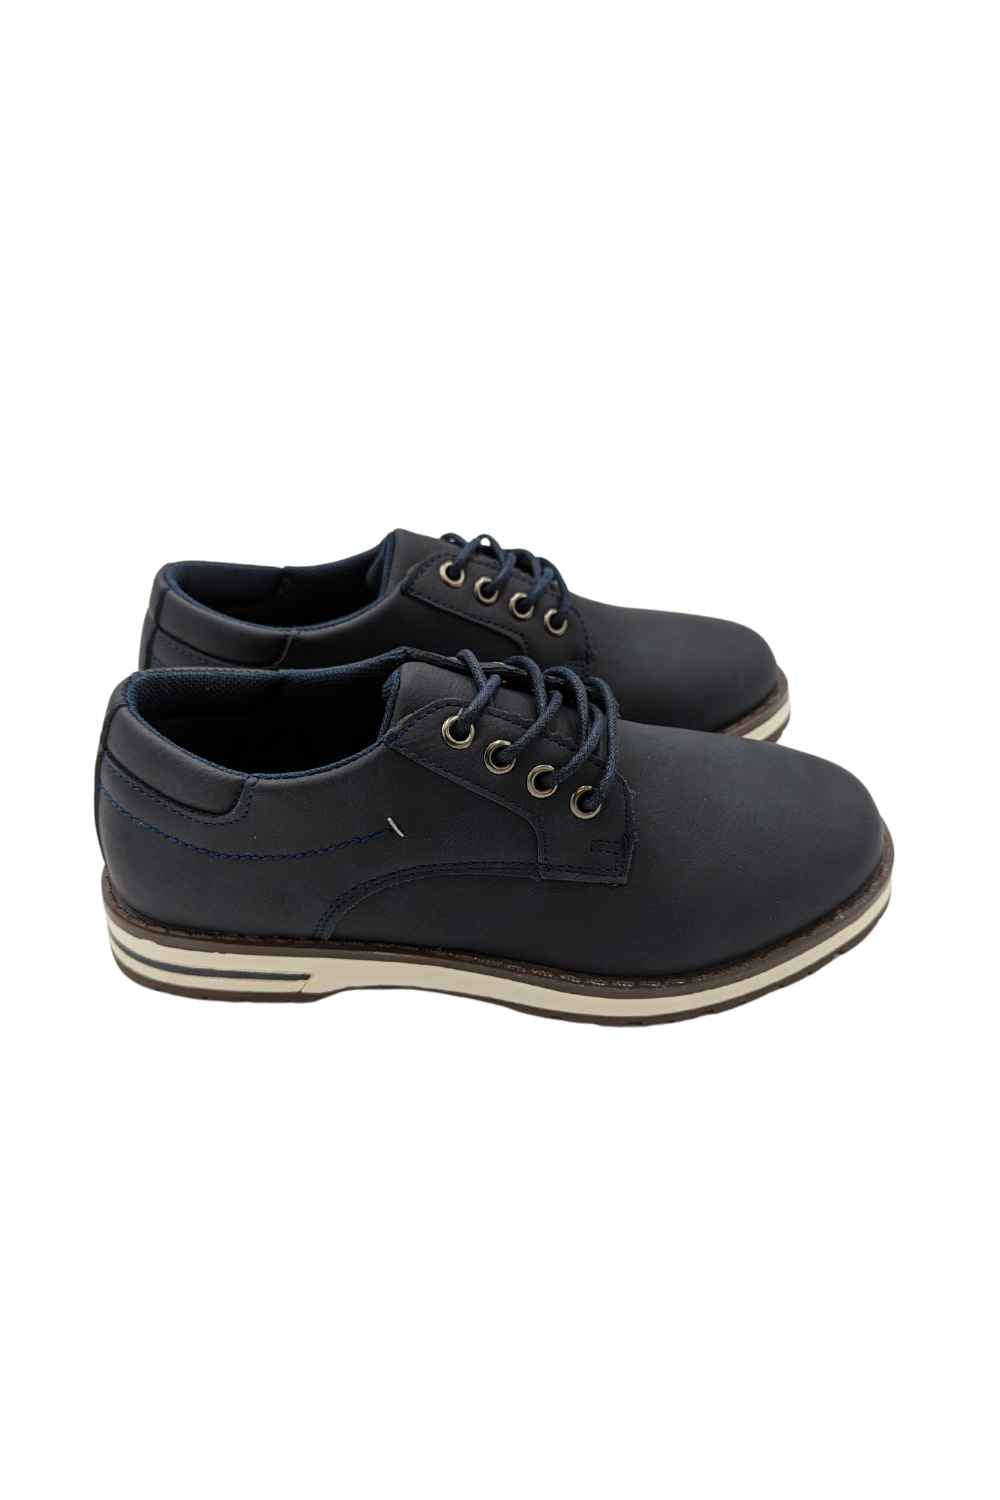 Leon Boys Navy Shoes-Side view